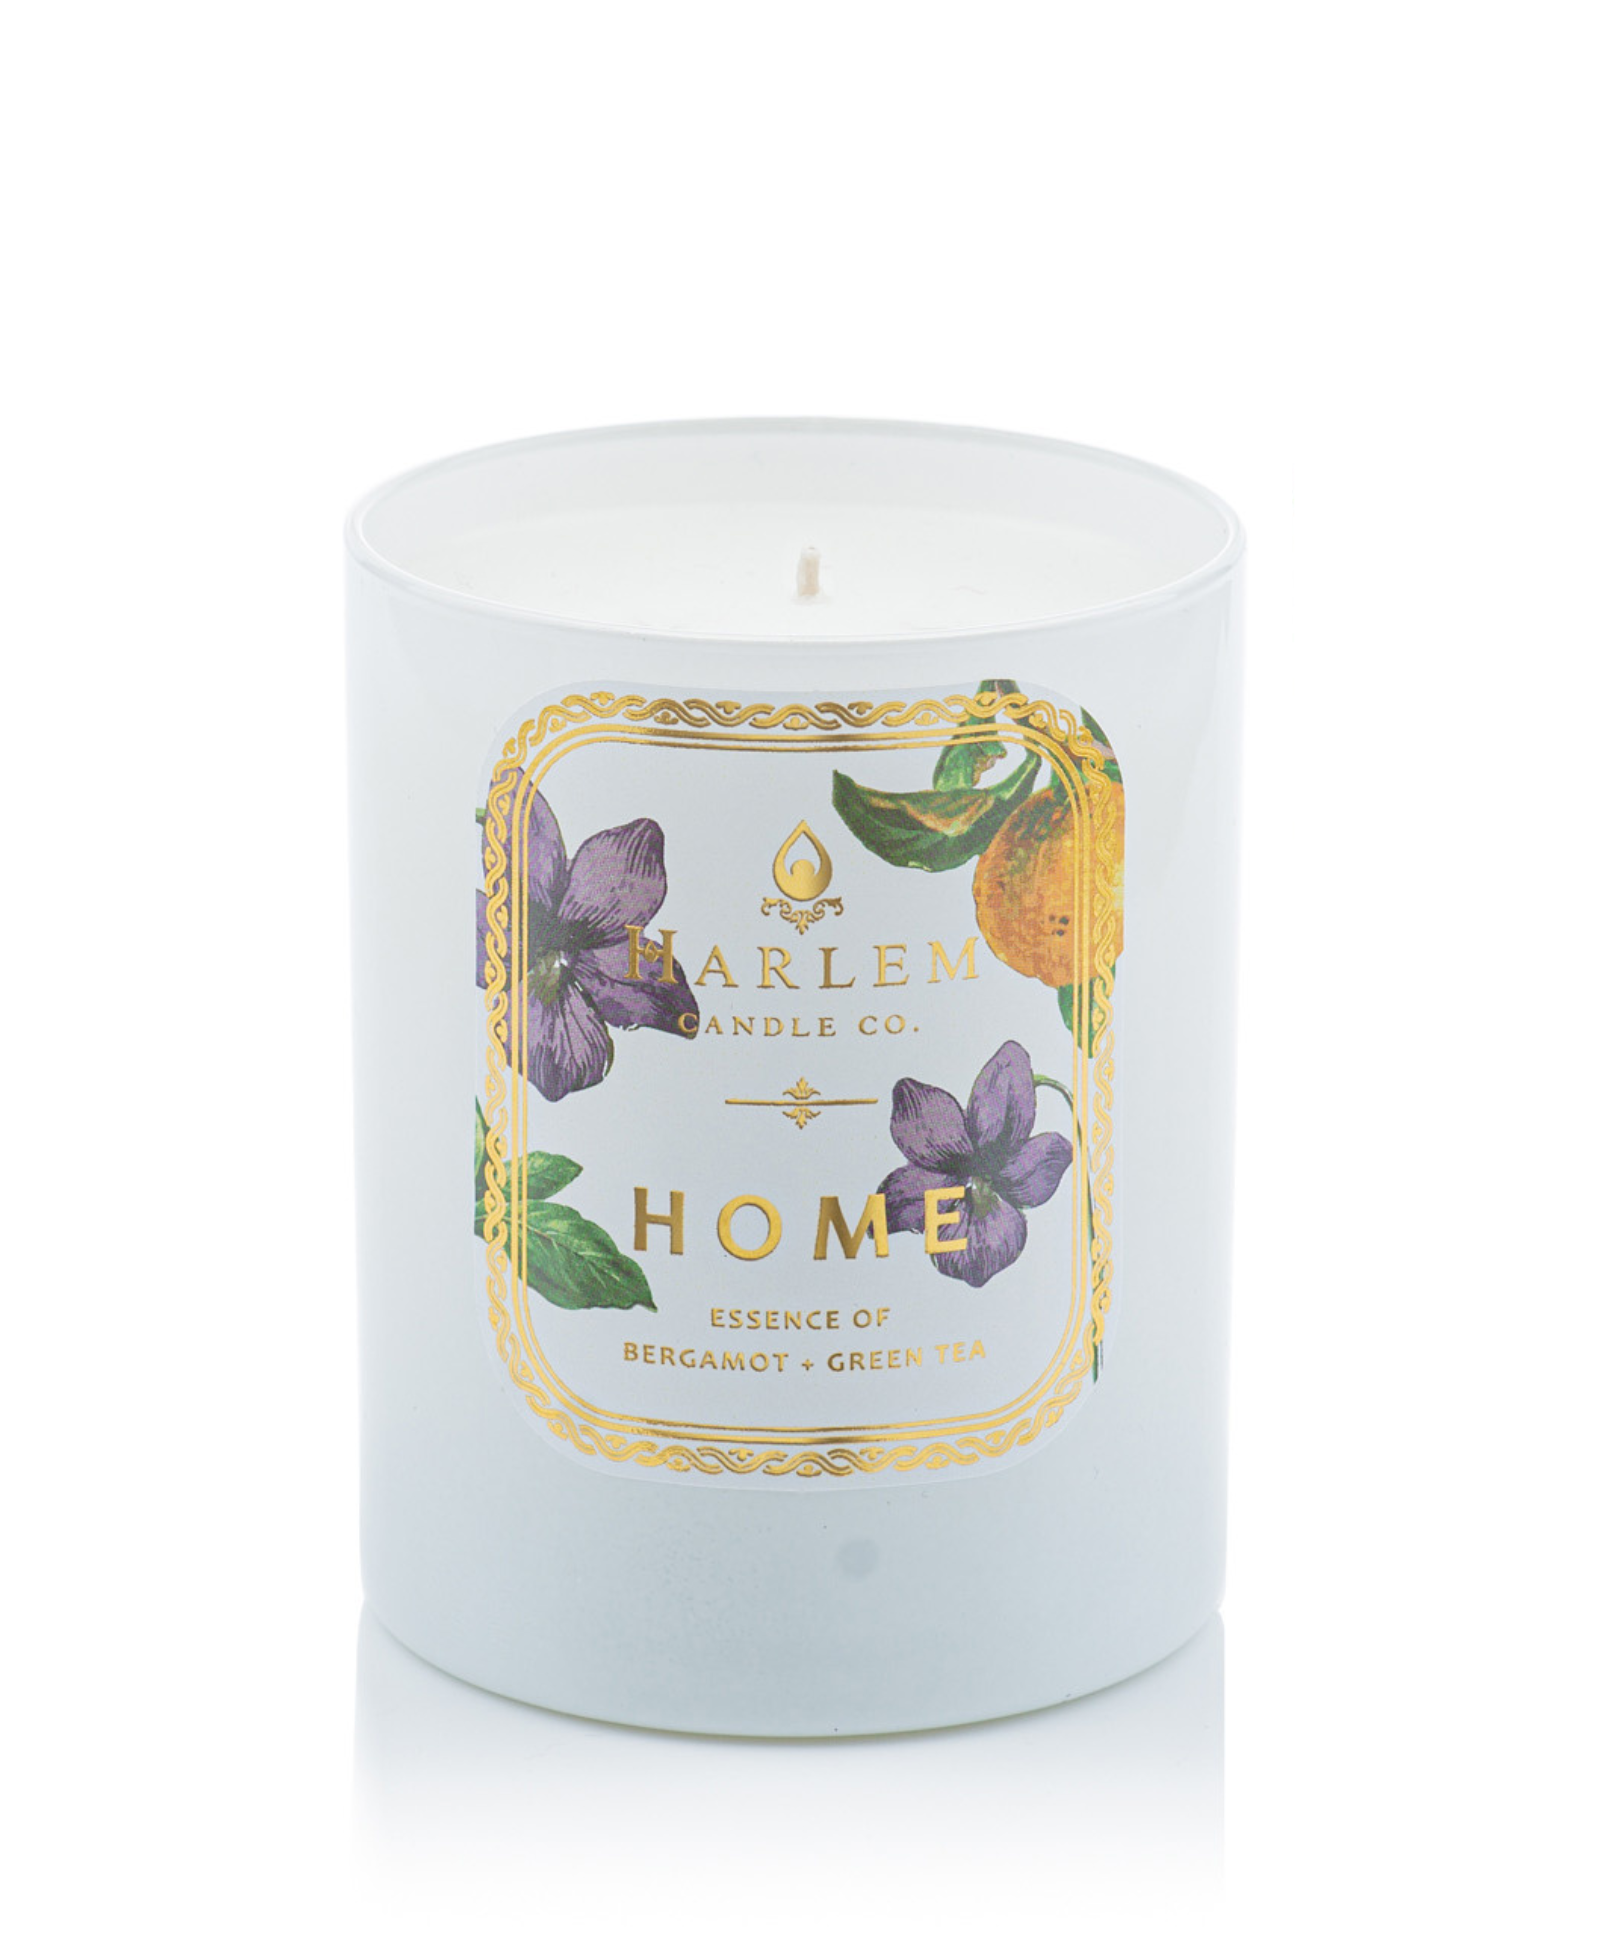 A photo of our Home candle from the Botanical Collection